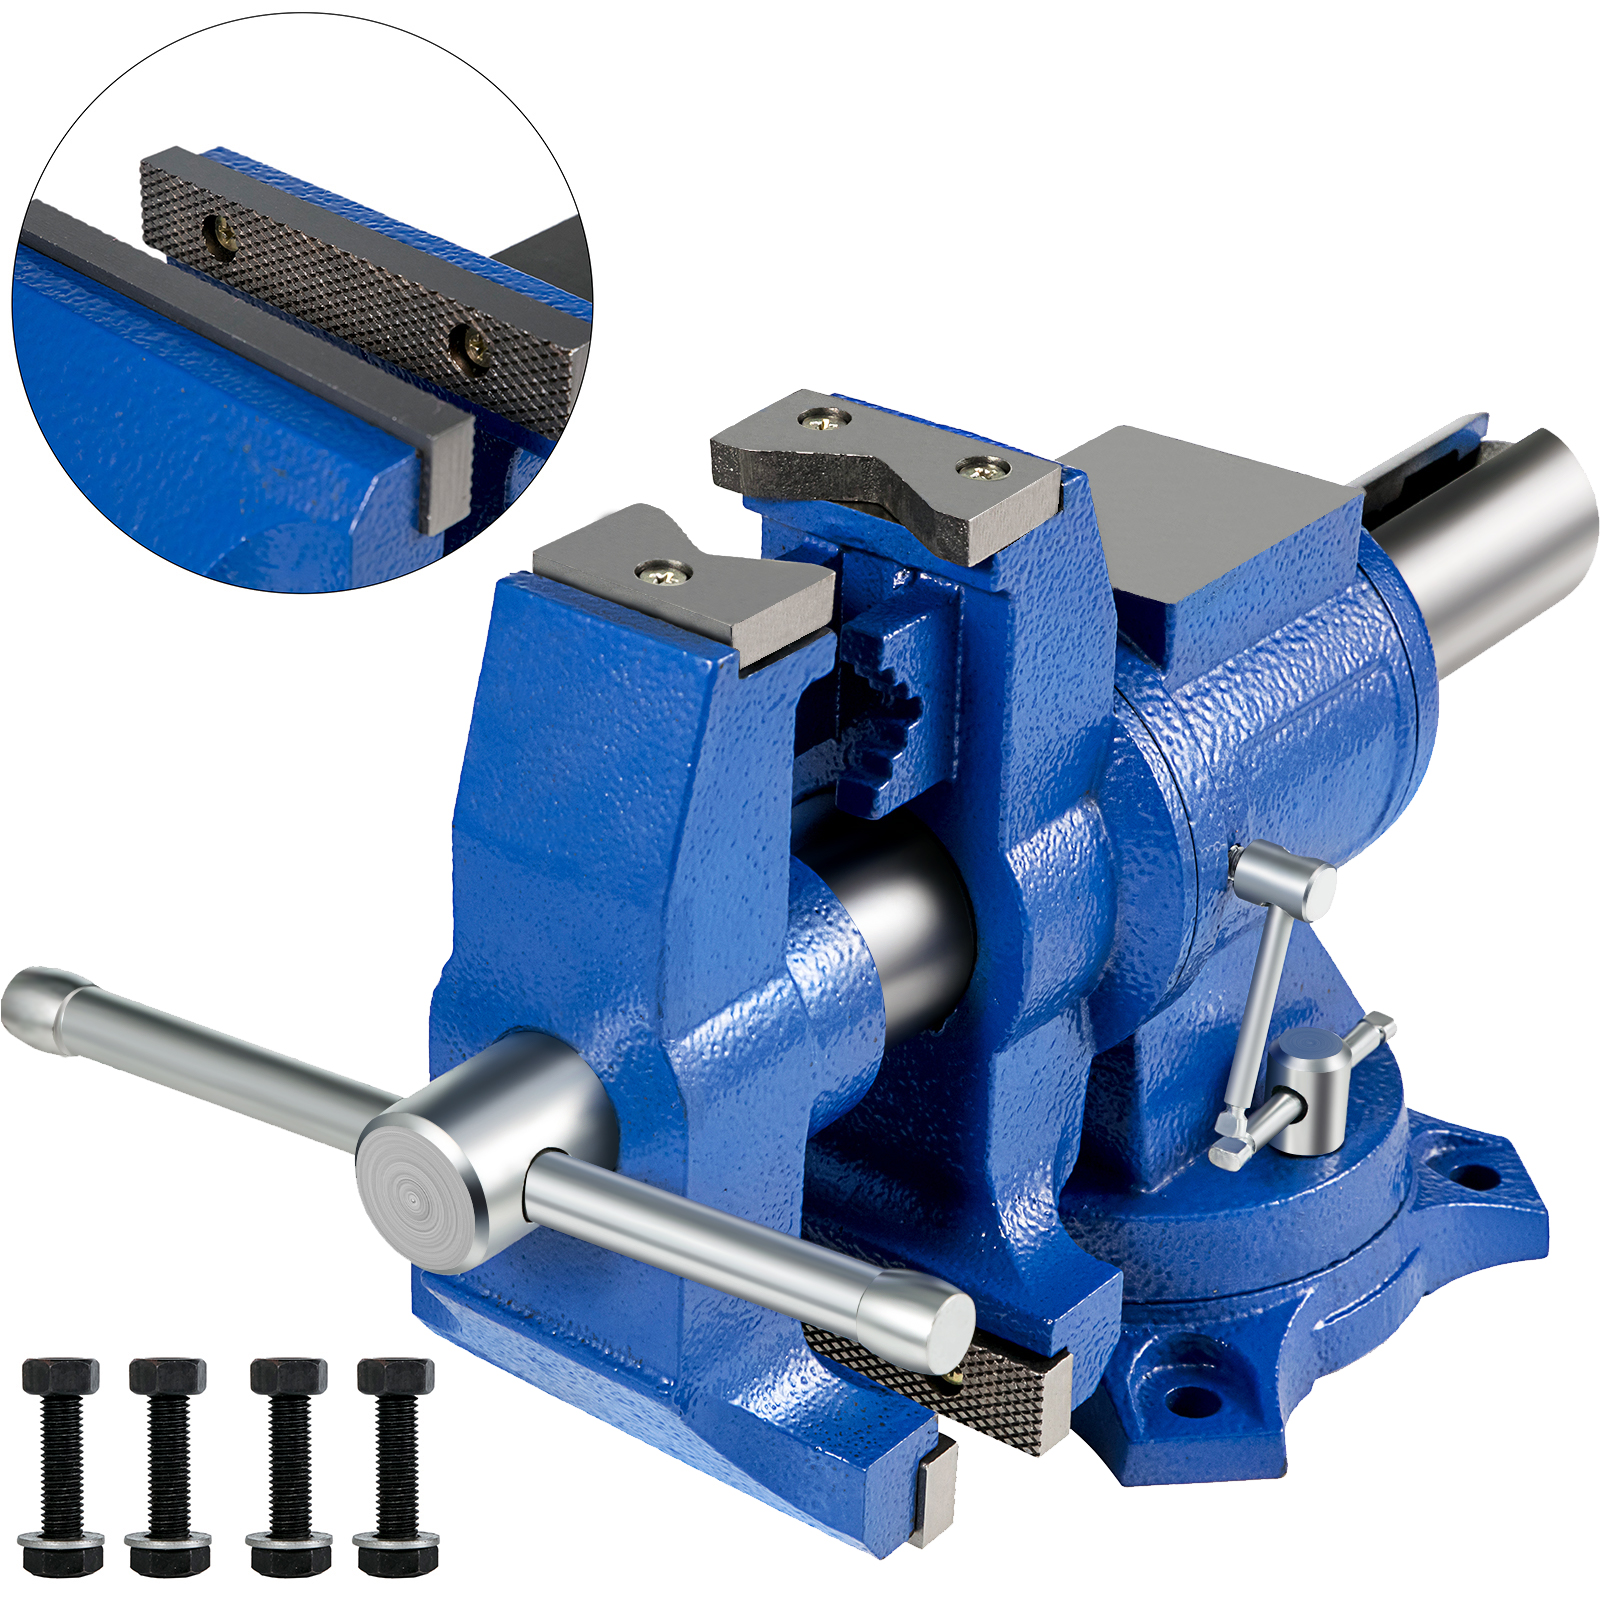 Multi-Purpose Bench Vise 5-Inch with Swivel Base Free Shipping NEW 